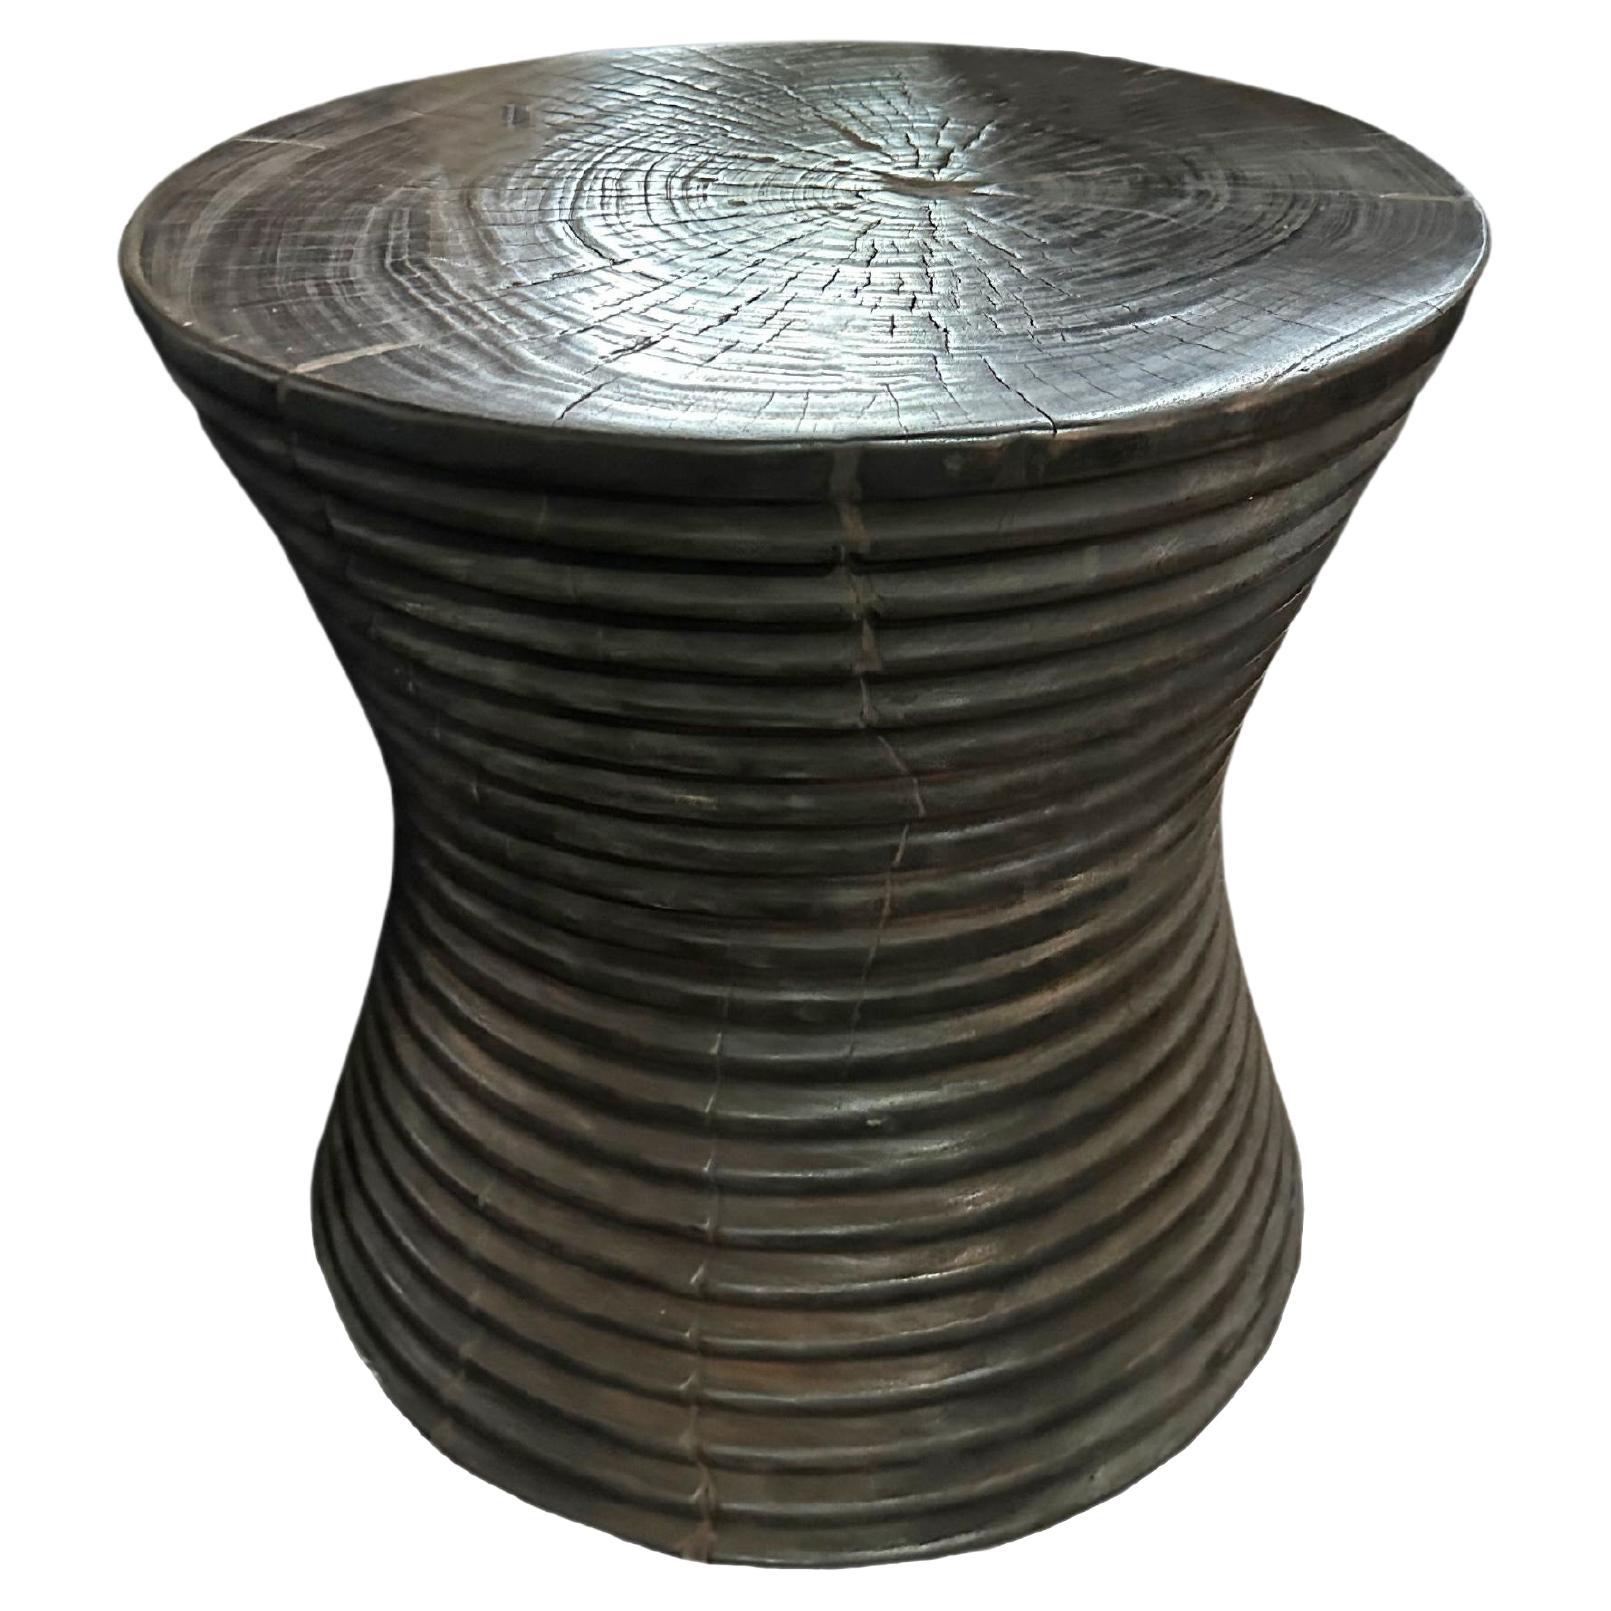 Sculptural Side Table Solid Mango Wood with Ribbed Detailing